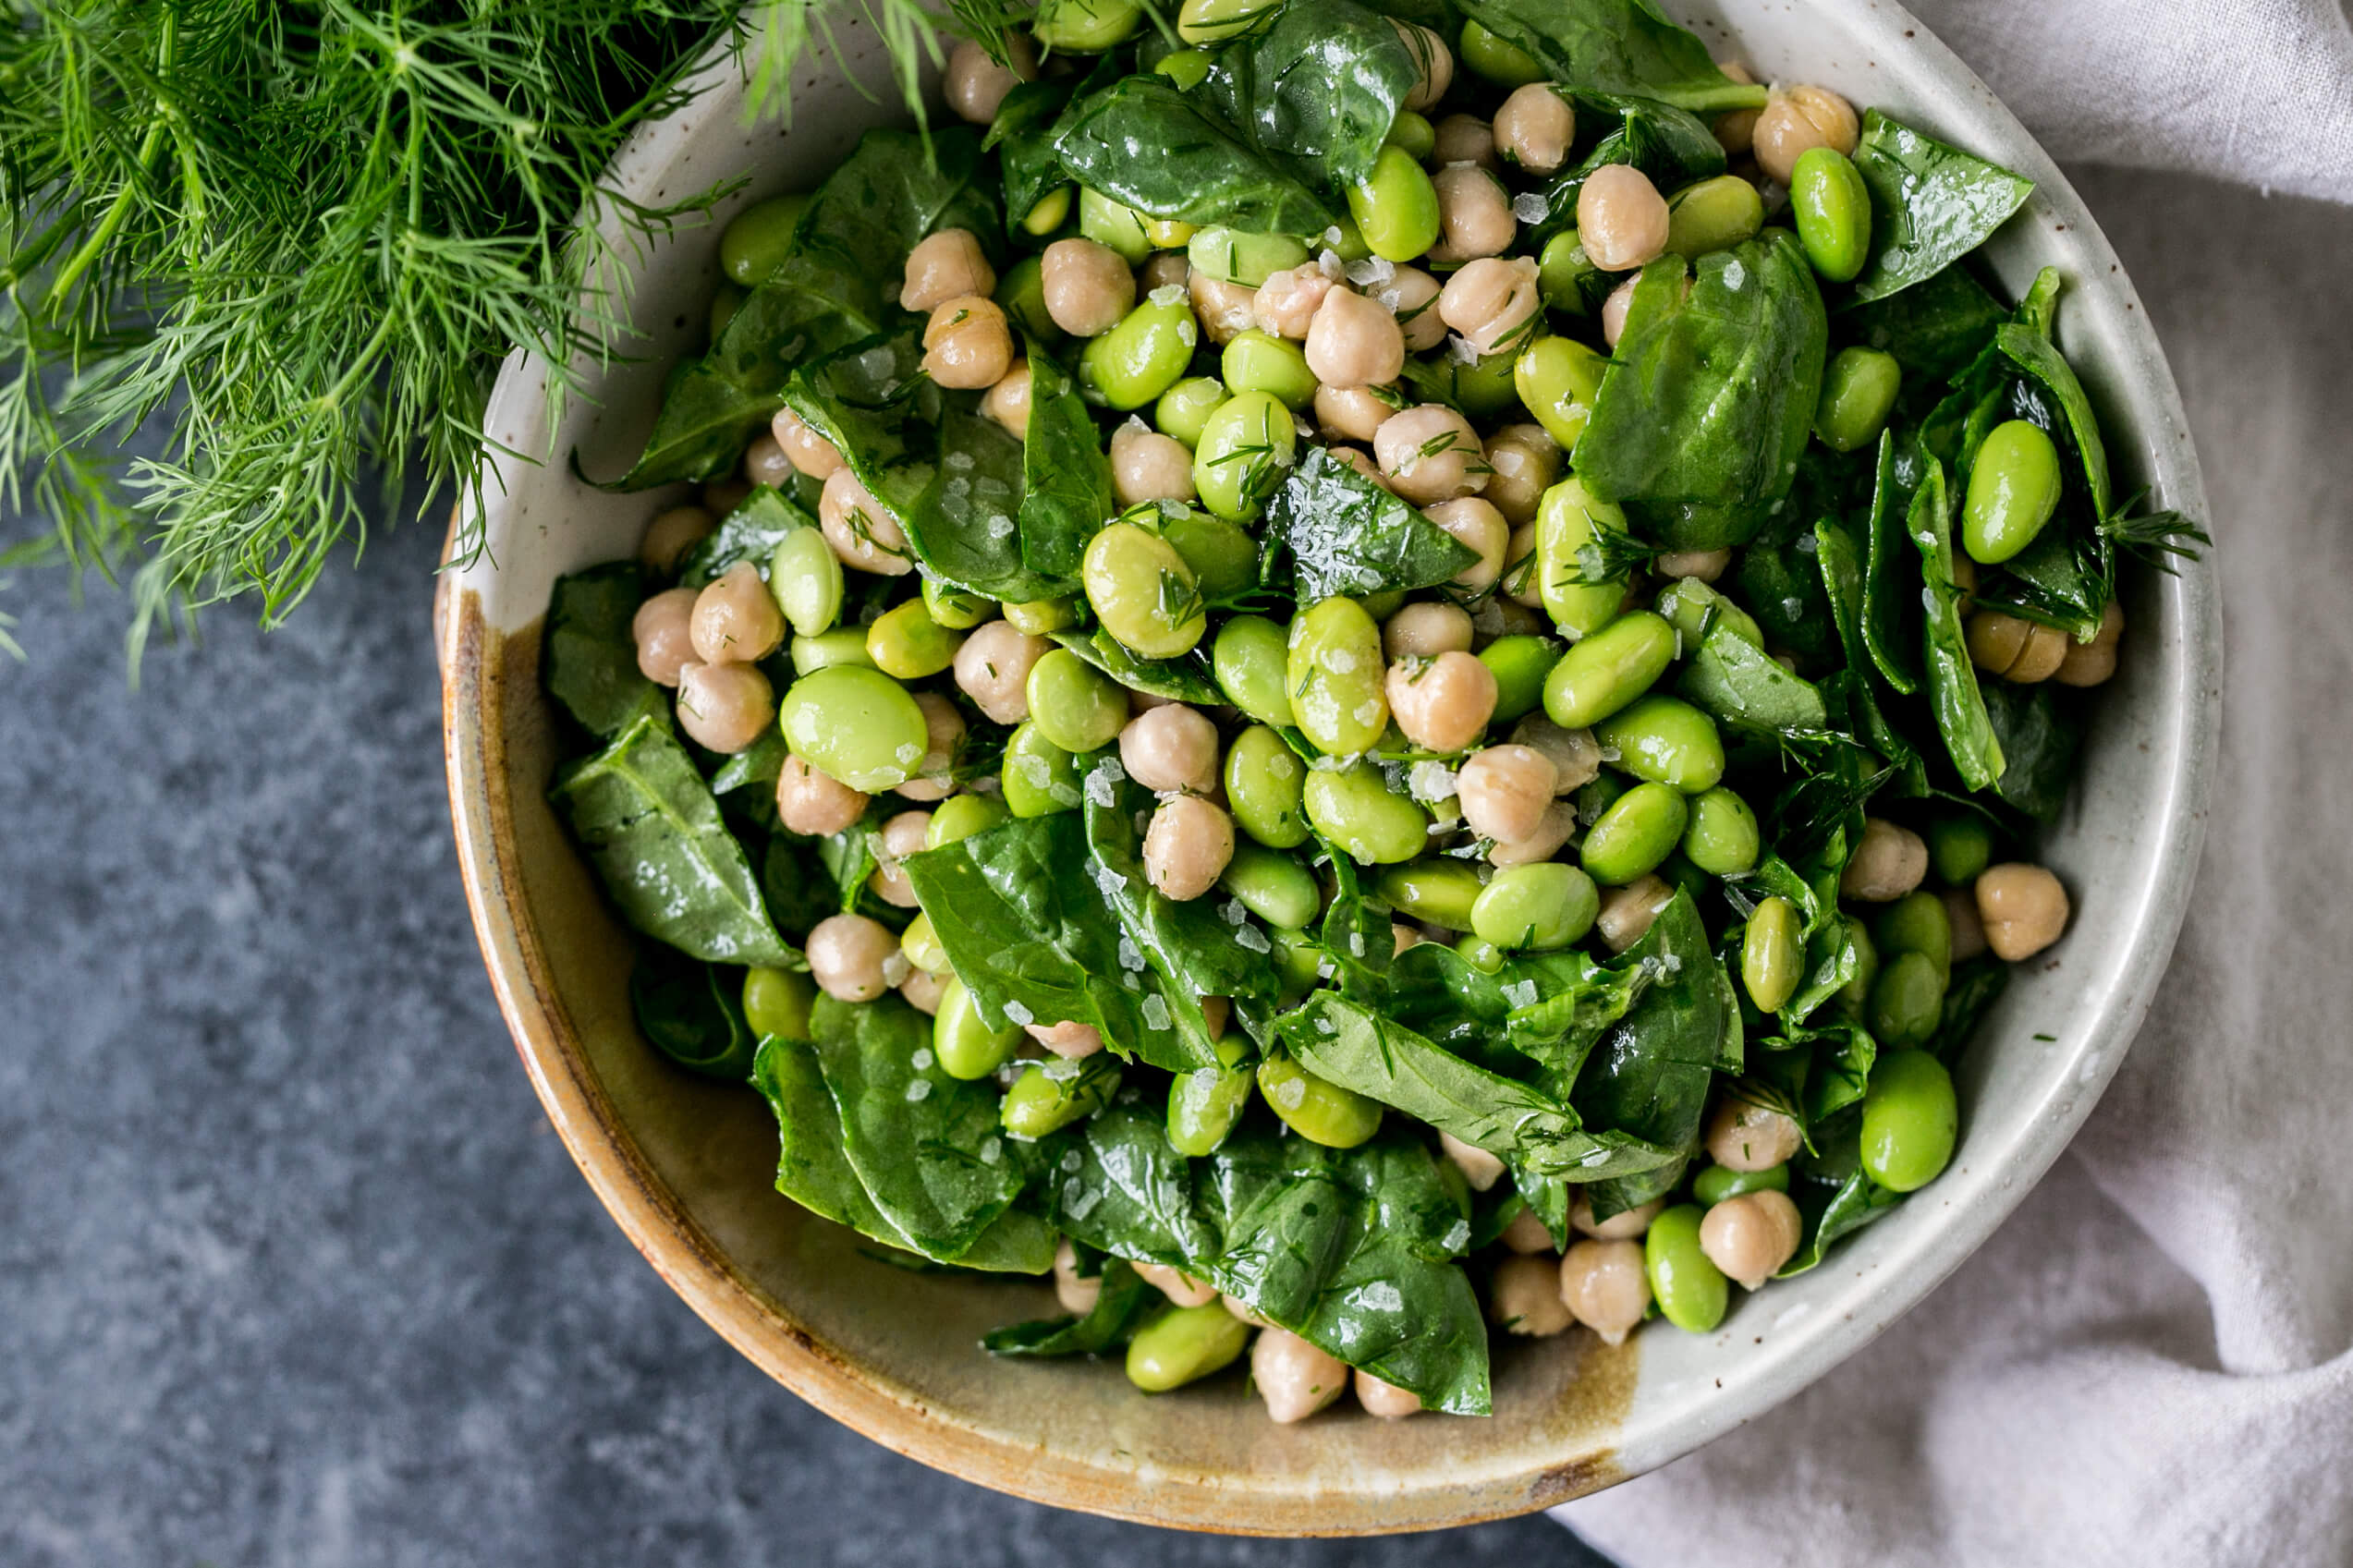 20 Healthy Meals to Help Your Clients Eat Healthy on a Tight Budget: Chickpea Edamame Salad with Lemon & Dill